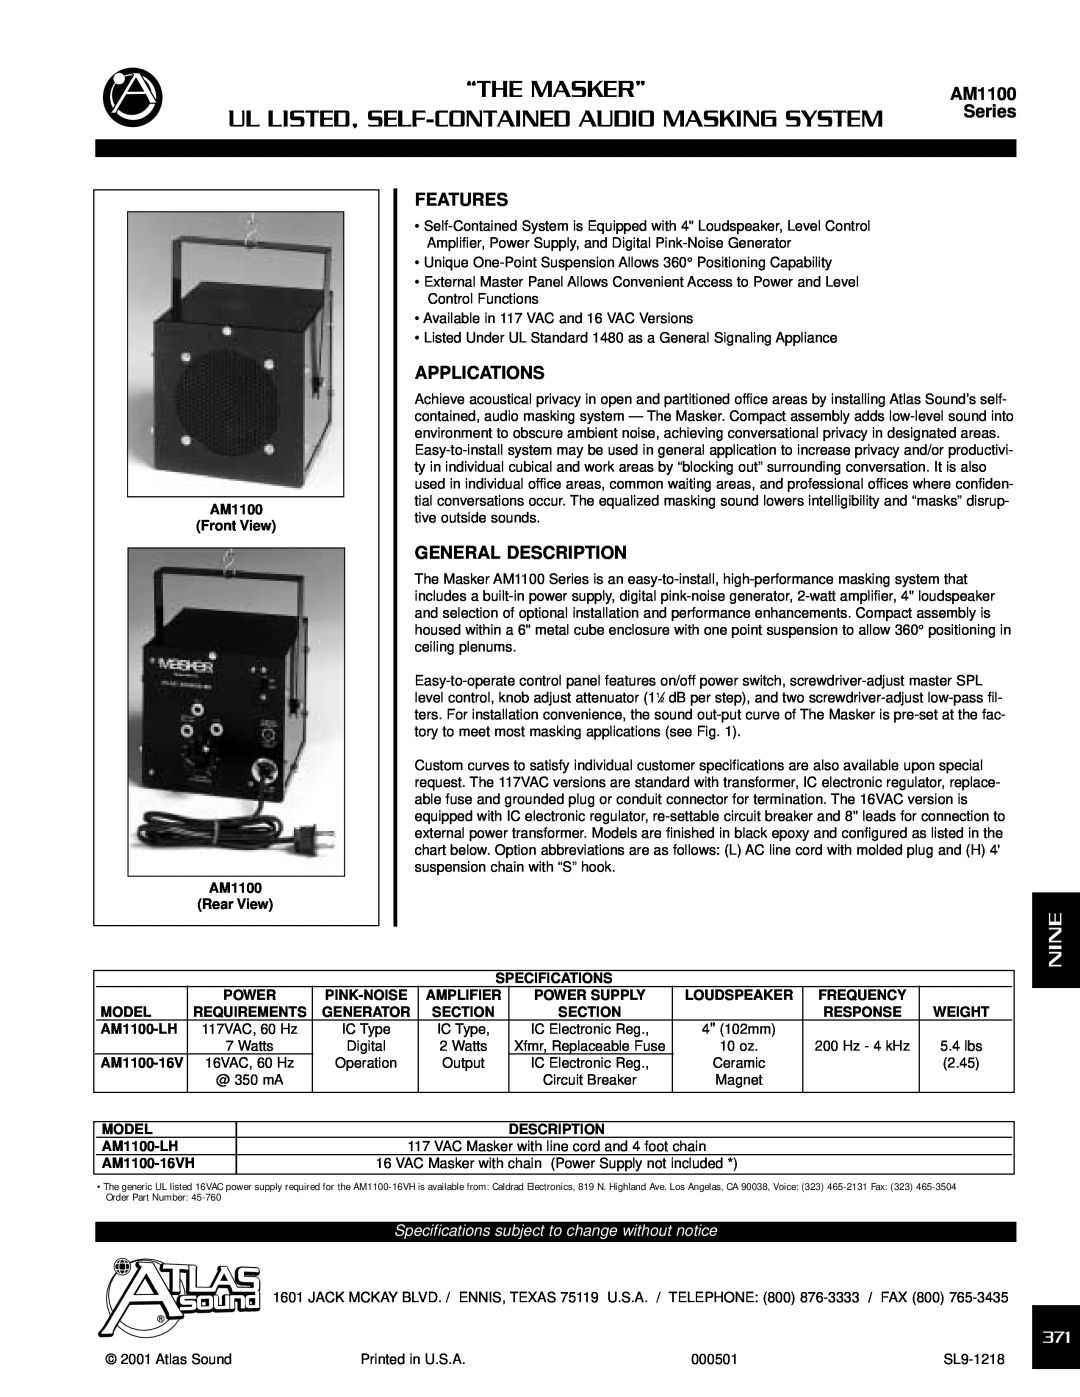 Atlas Sound installation instructions Installation Instructions, AM1100 SERIES, Power Requirements 